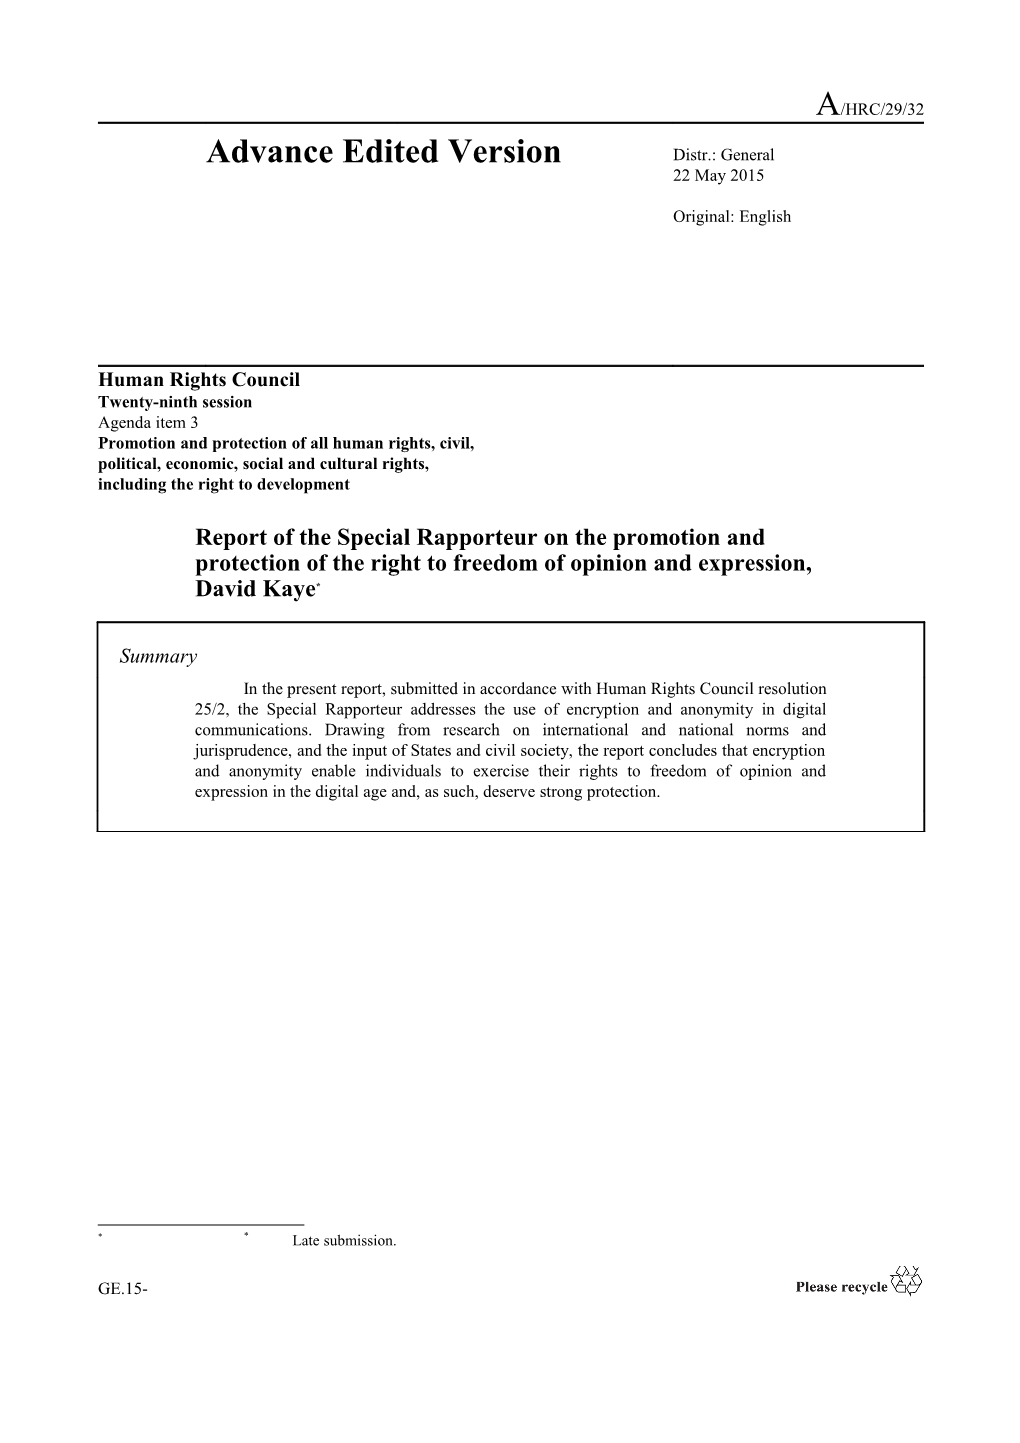 Report of the Special Rapporteur on the Promotion and Protection of the Right to Freedom